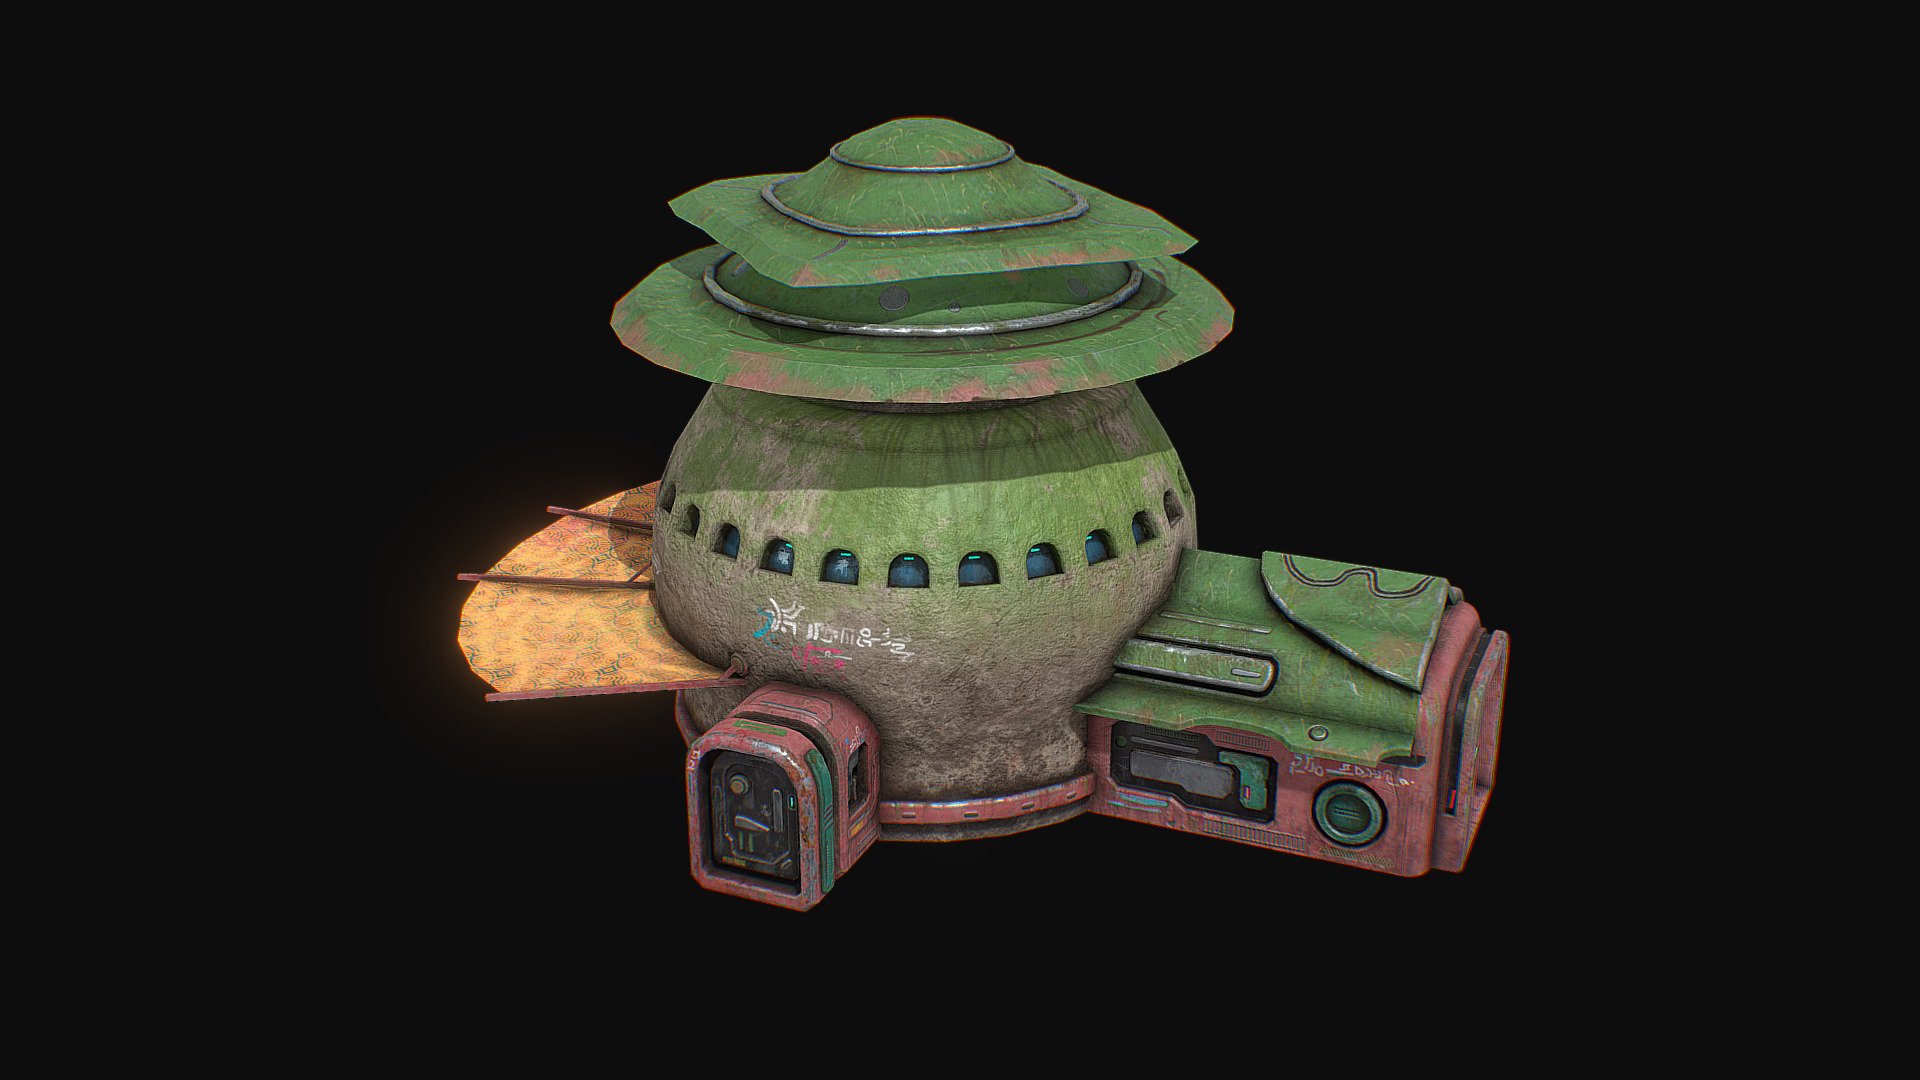 Low poly sci fi market building 4 3d model.

12 330 tris.

File formats - blend (2.91.2), fbx, obj

Ready for games and other real time applications.

PBR textures - 4096x4096 png format

Base color map,

Normal map,

Roughness map,

Metallic map ,

Ambient Occlusion map,

Emissive map,

Also included Substance painter texture maps presets for:

Unreal Engine 4,

Unity (Standart Metallic) 3d model